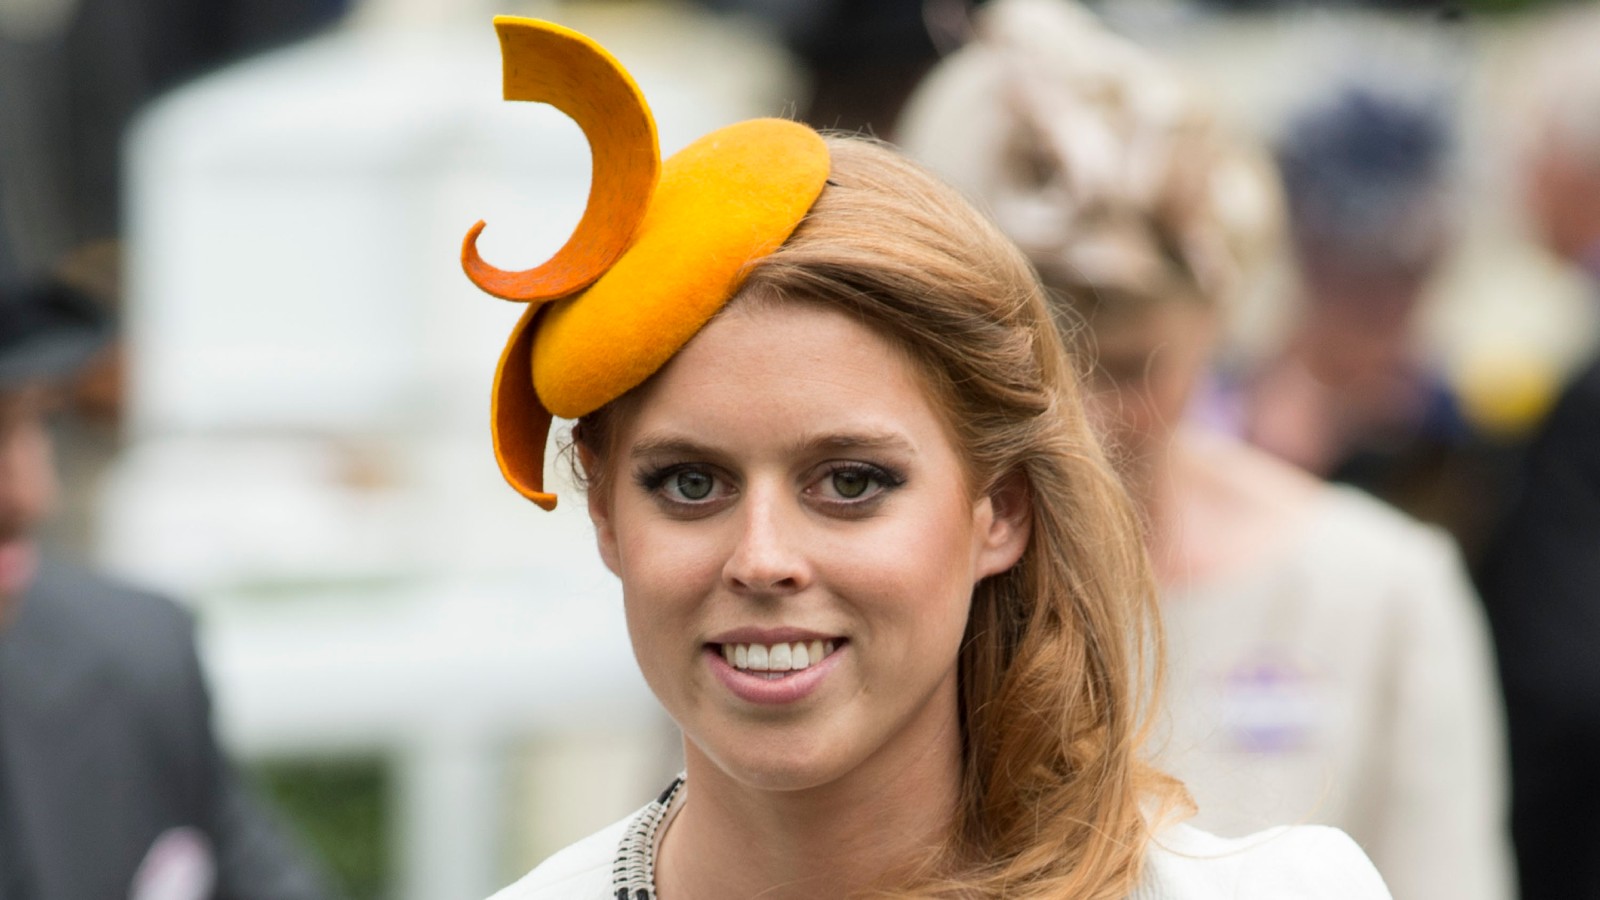 How different will Princess Beatrice's birth announcement be? | GoodTo